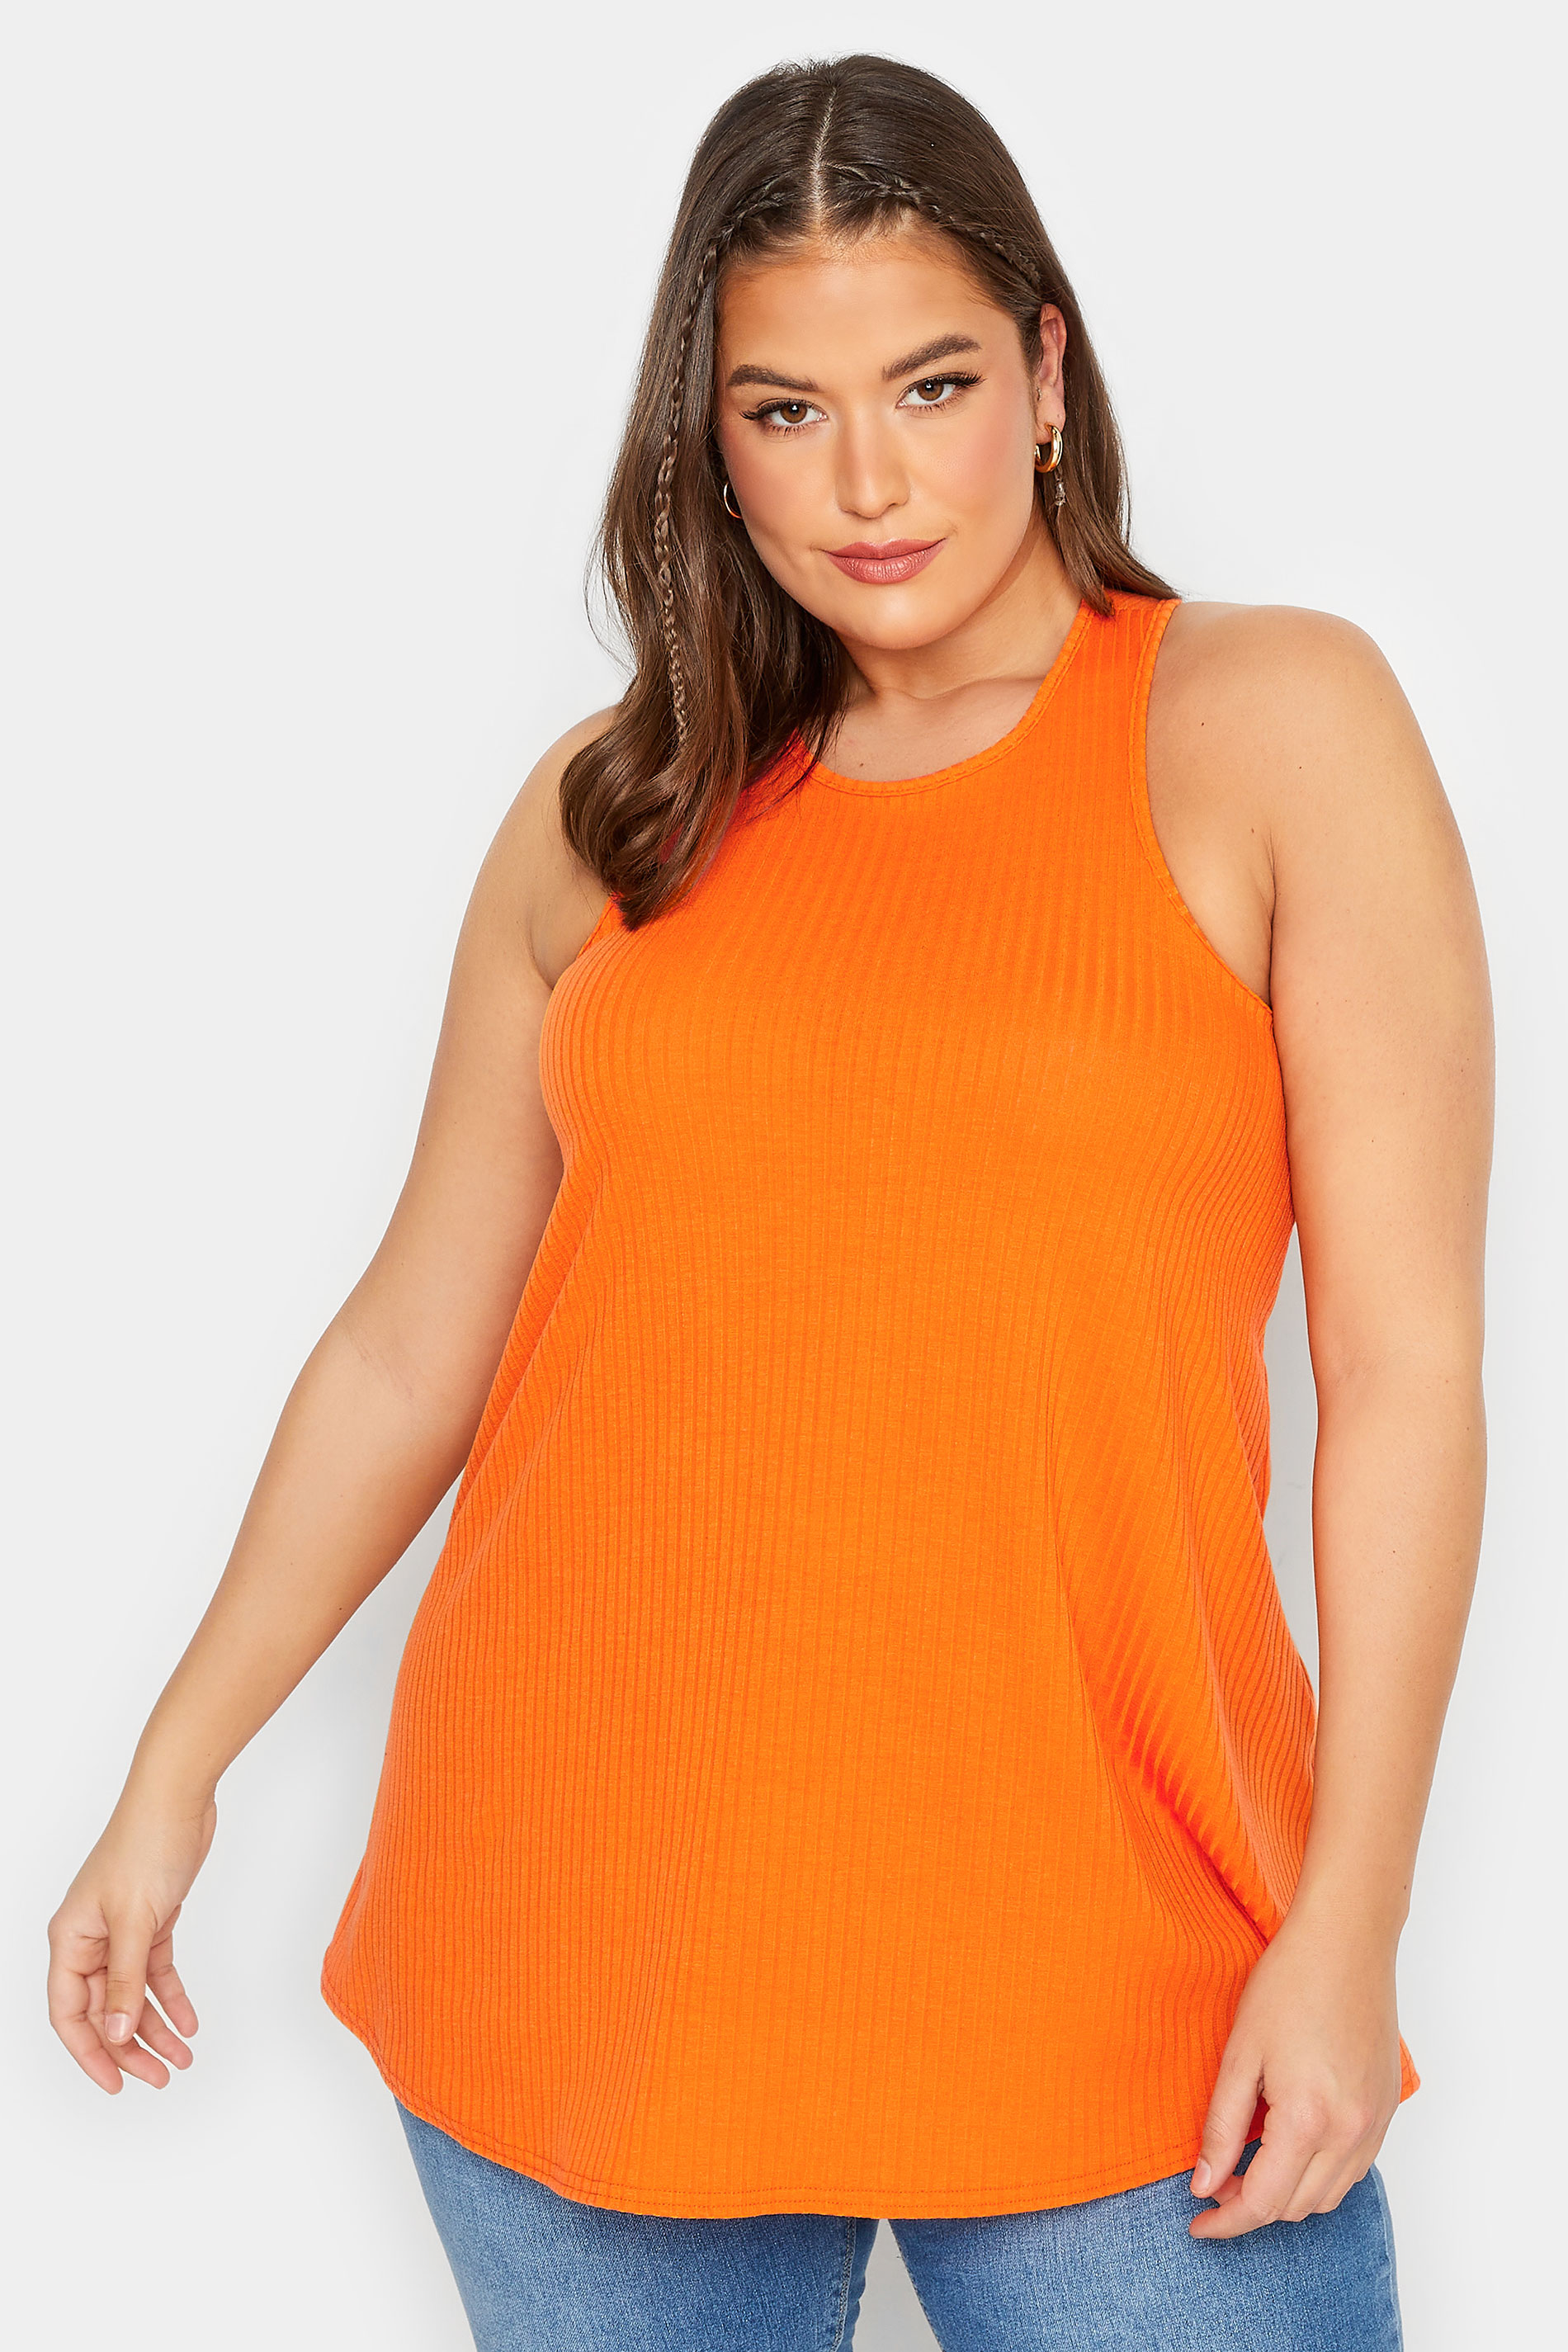 LIMITED COLLECTION Plus Size Orange Ribbed Racer Cami Vest Top | Yours Clothing  1